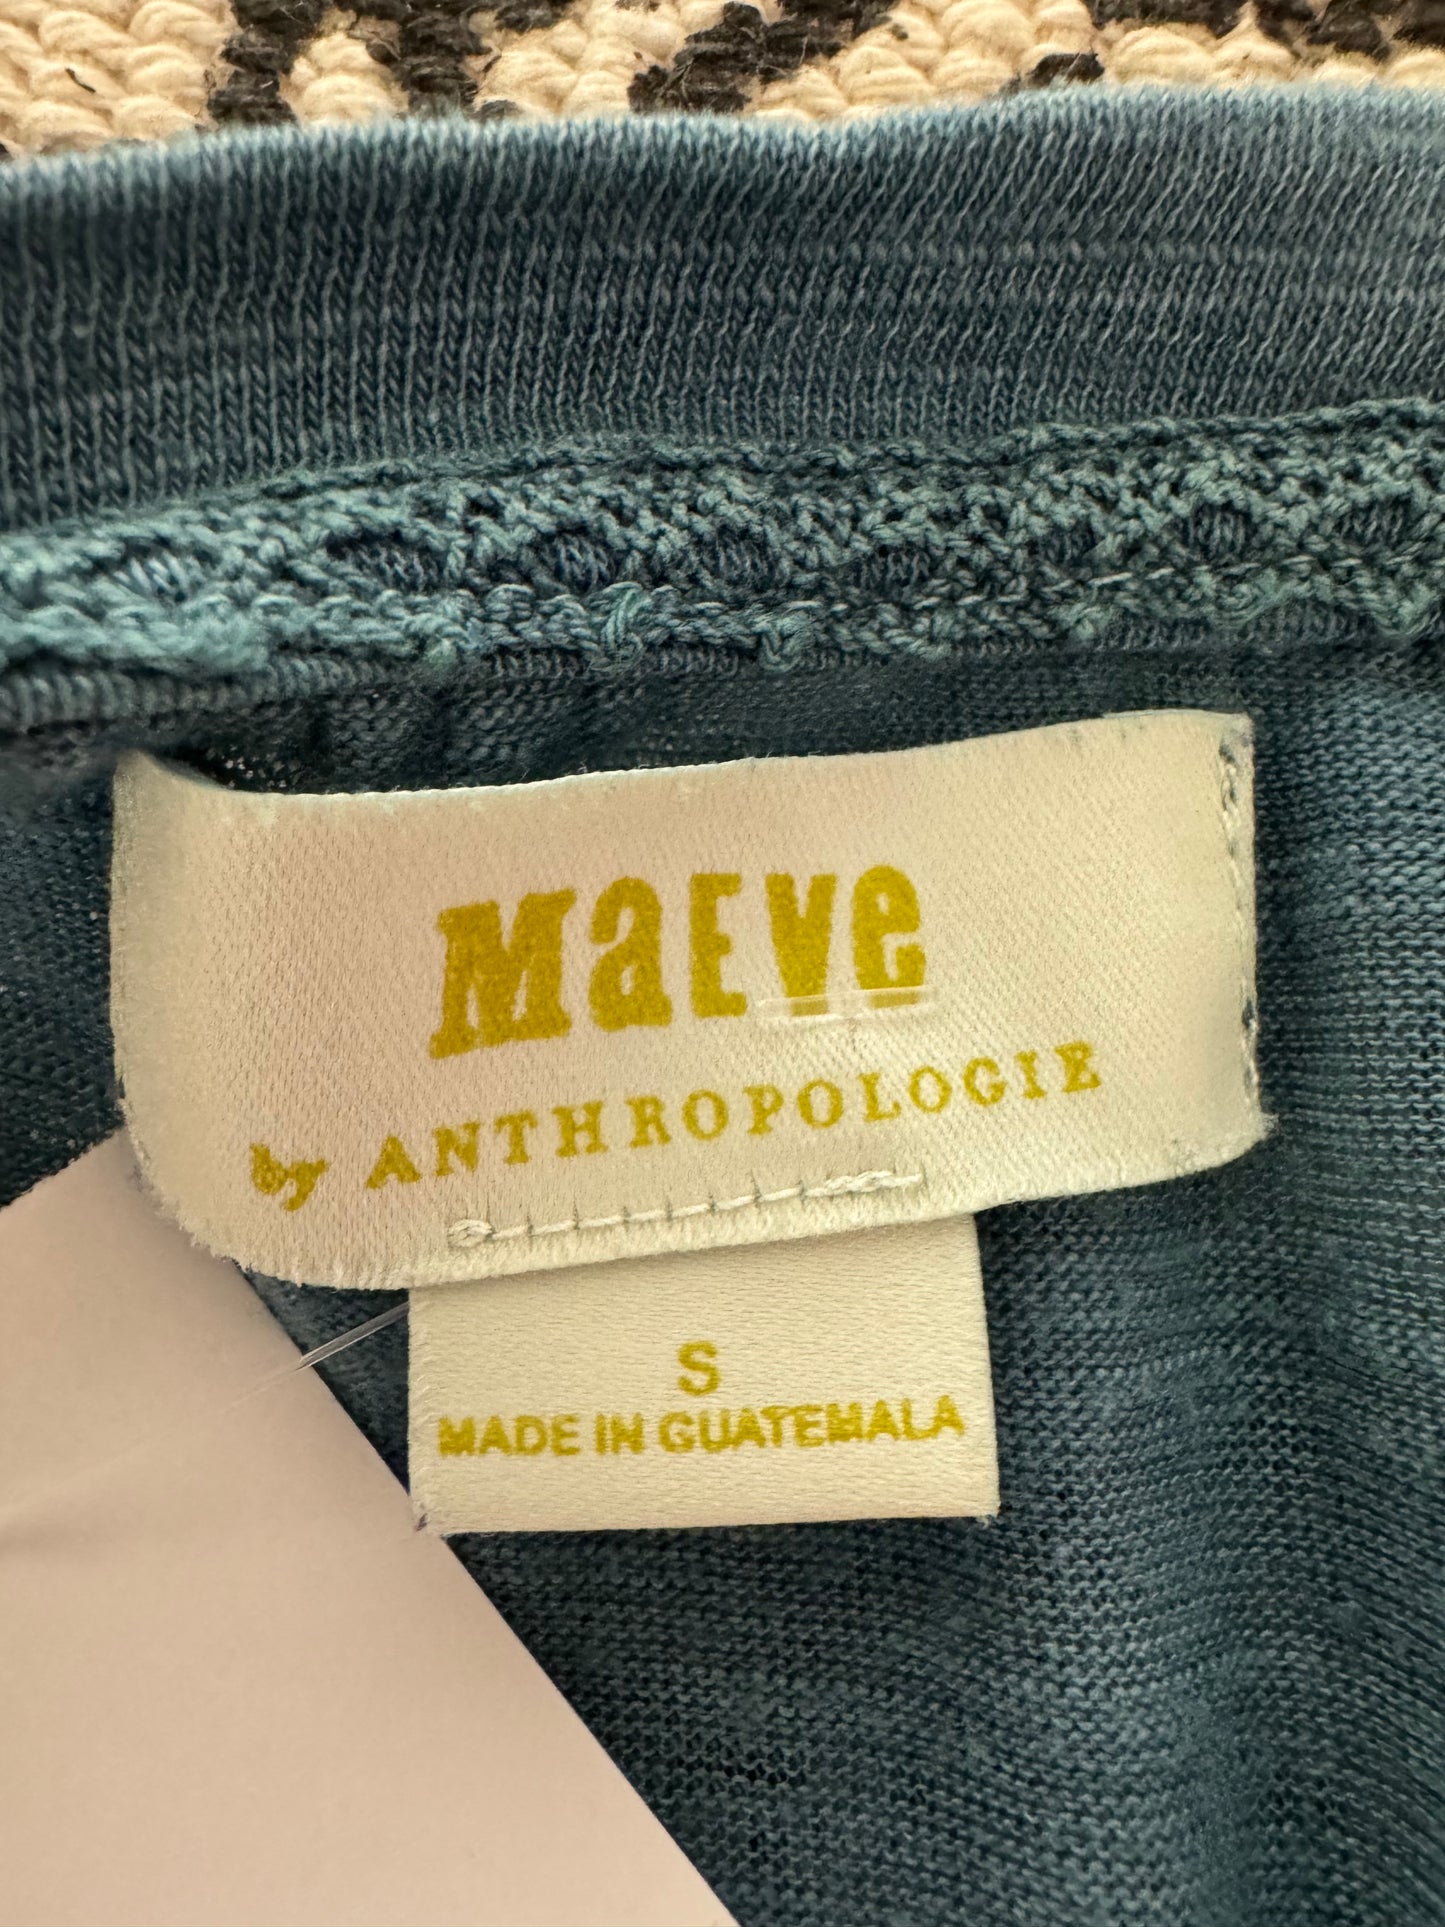 Maeve by Anthropologie